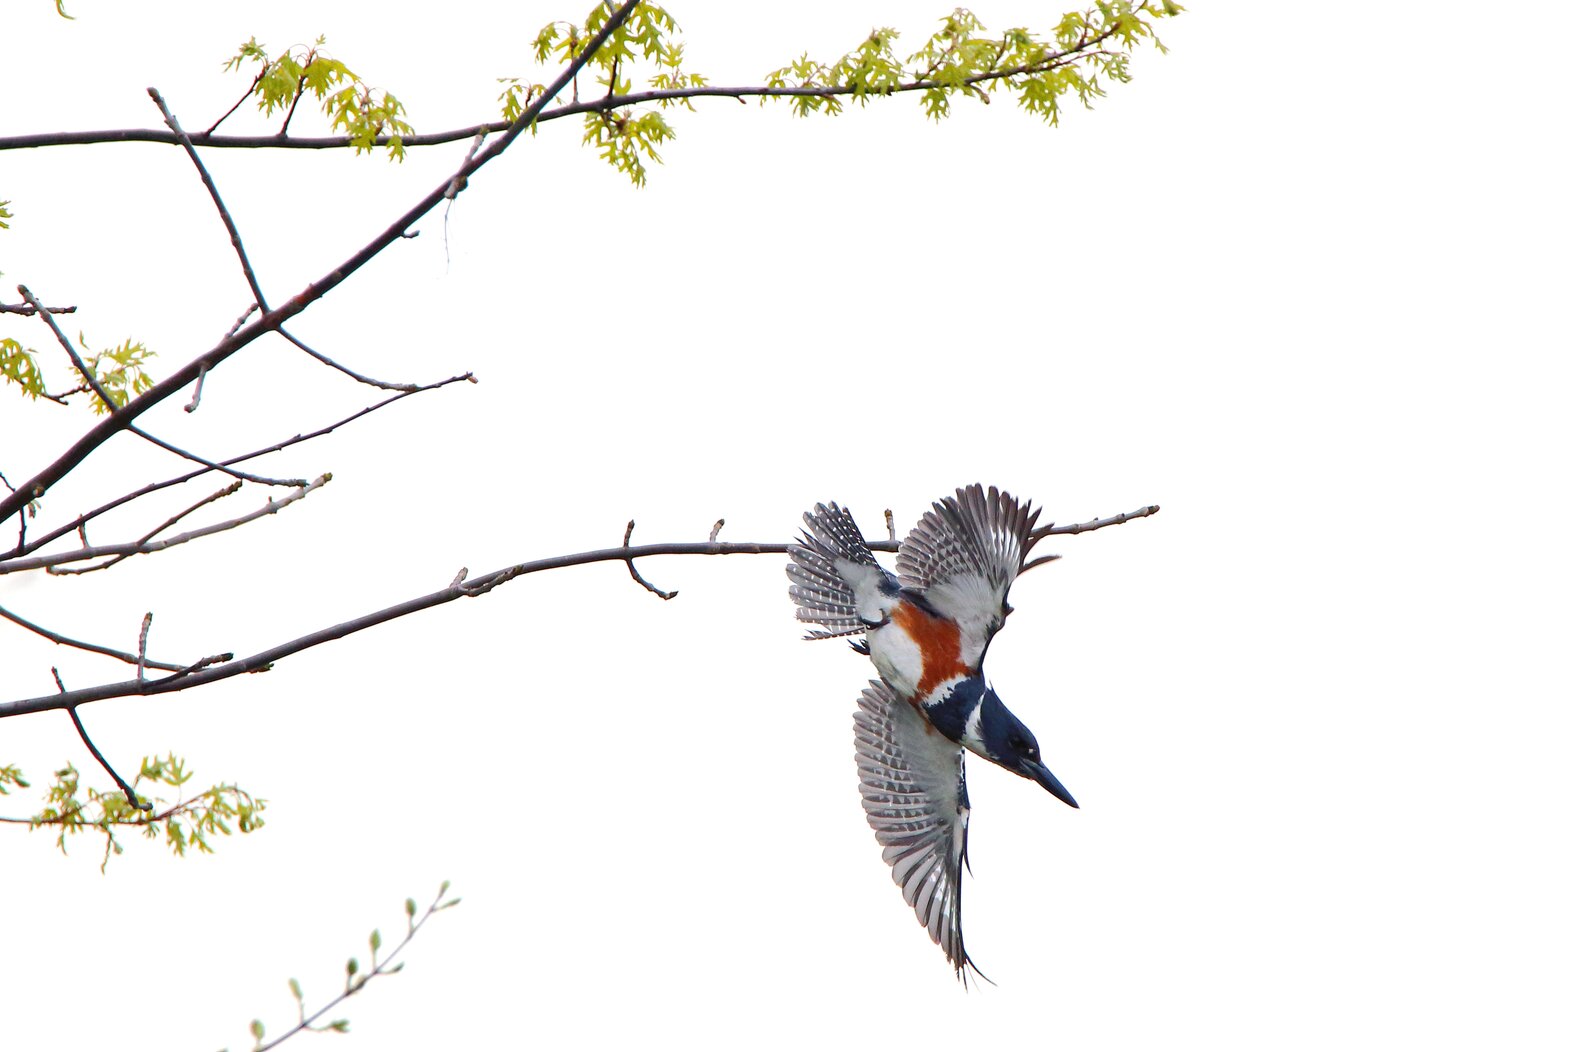 A female Belted Kingfisher takes off in Mount Loretto. Photo: Lawrence Pugliares